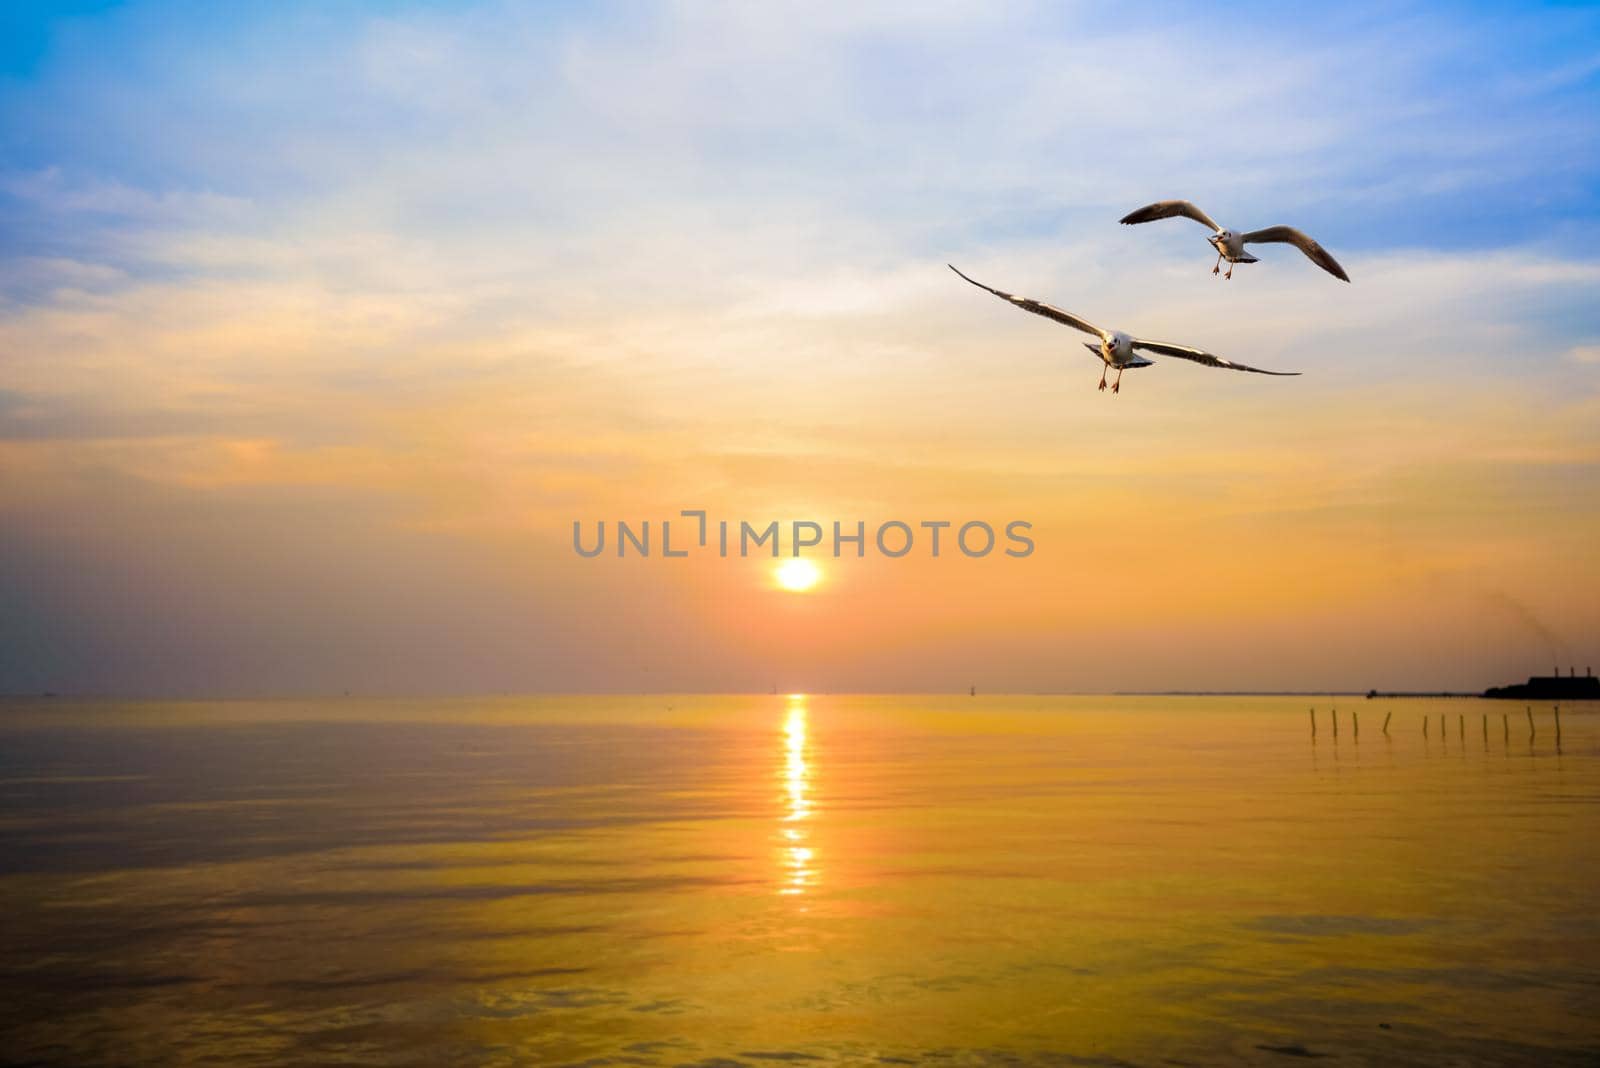 Pair of seagulls in yellow, orange, blue sky at sunrise, Animal in beautiful nature landscape for background, Two birds flying above the sea, water or ocean and horizon at sunset in Bang Pu, Thailand